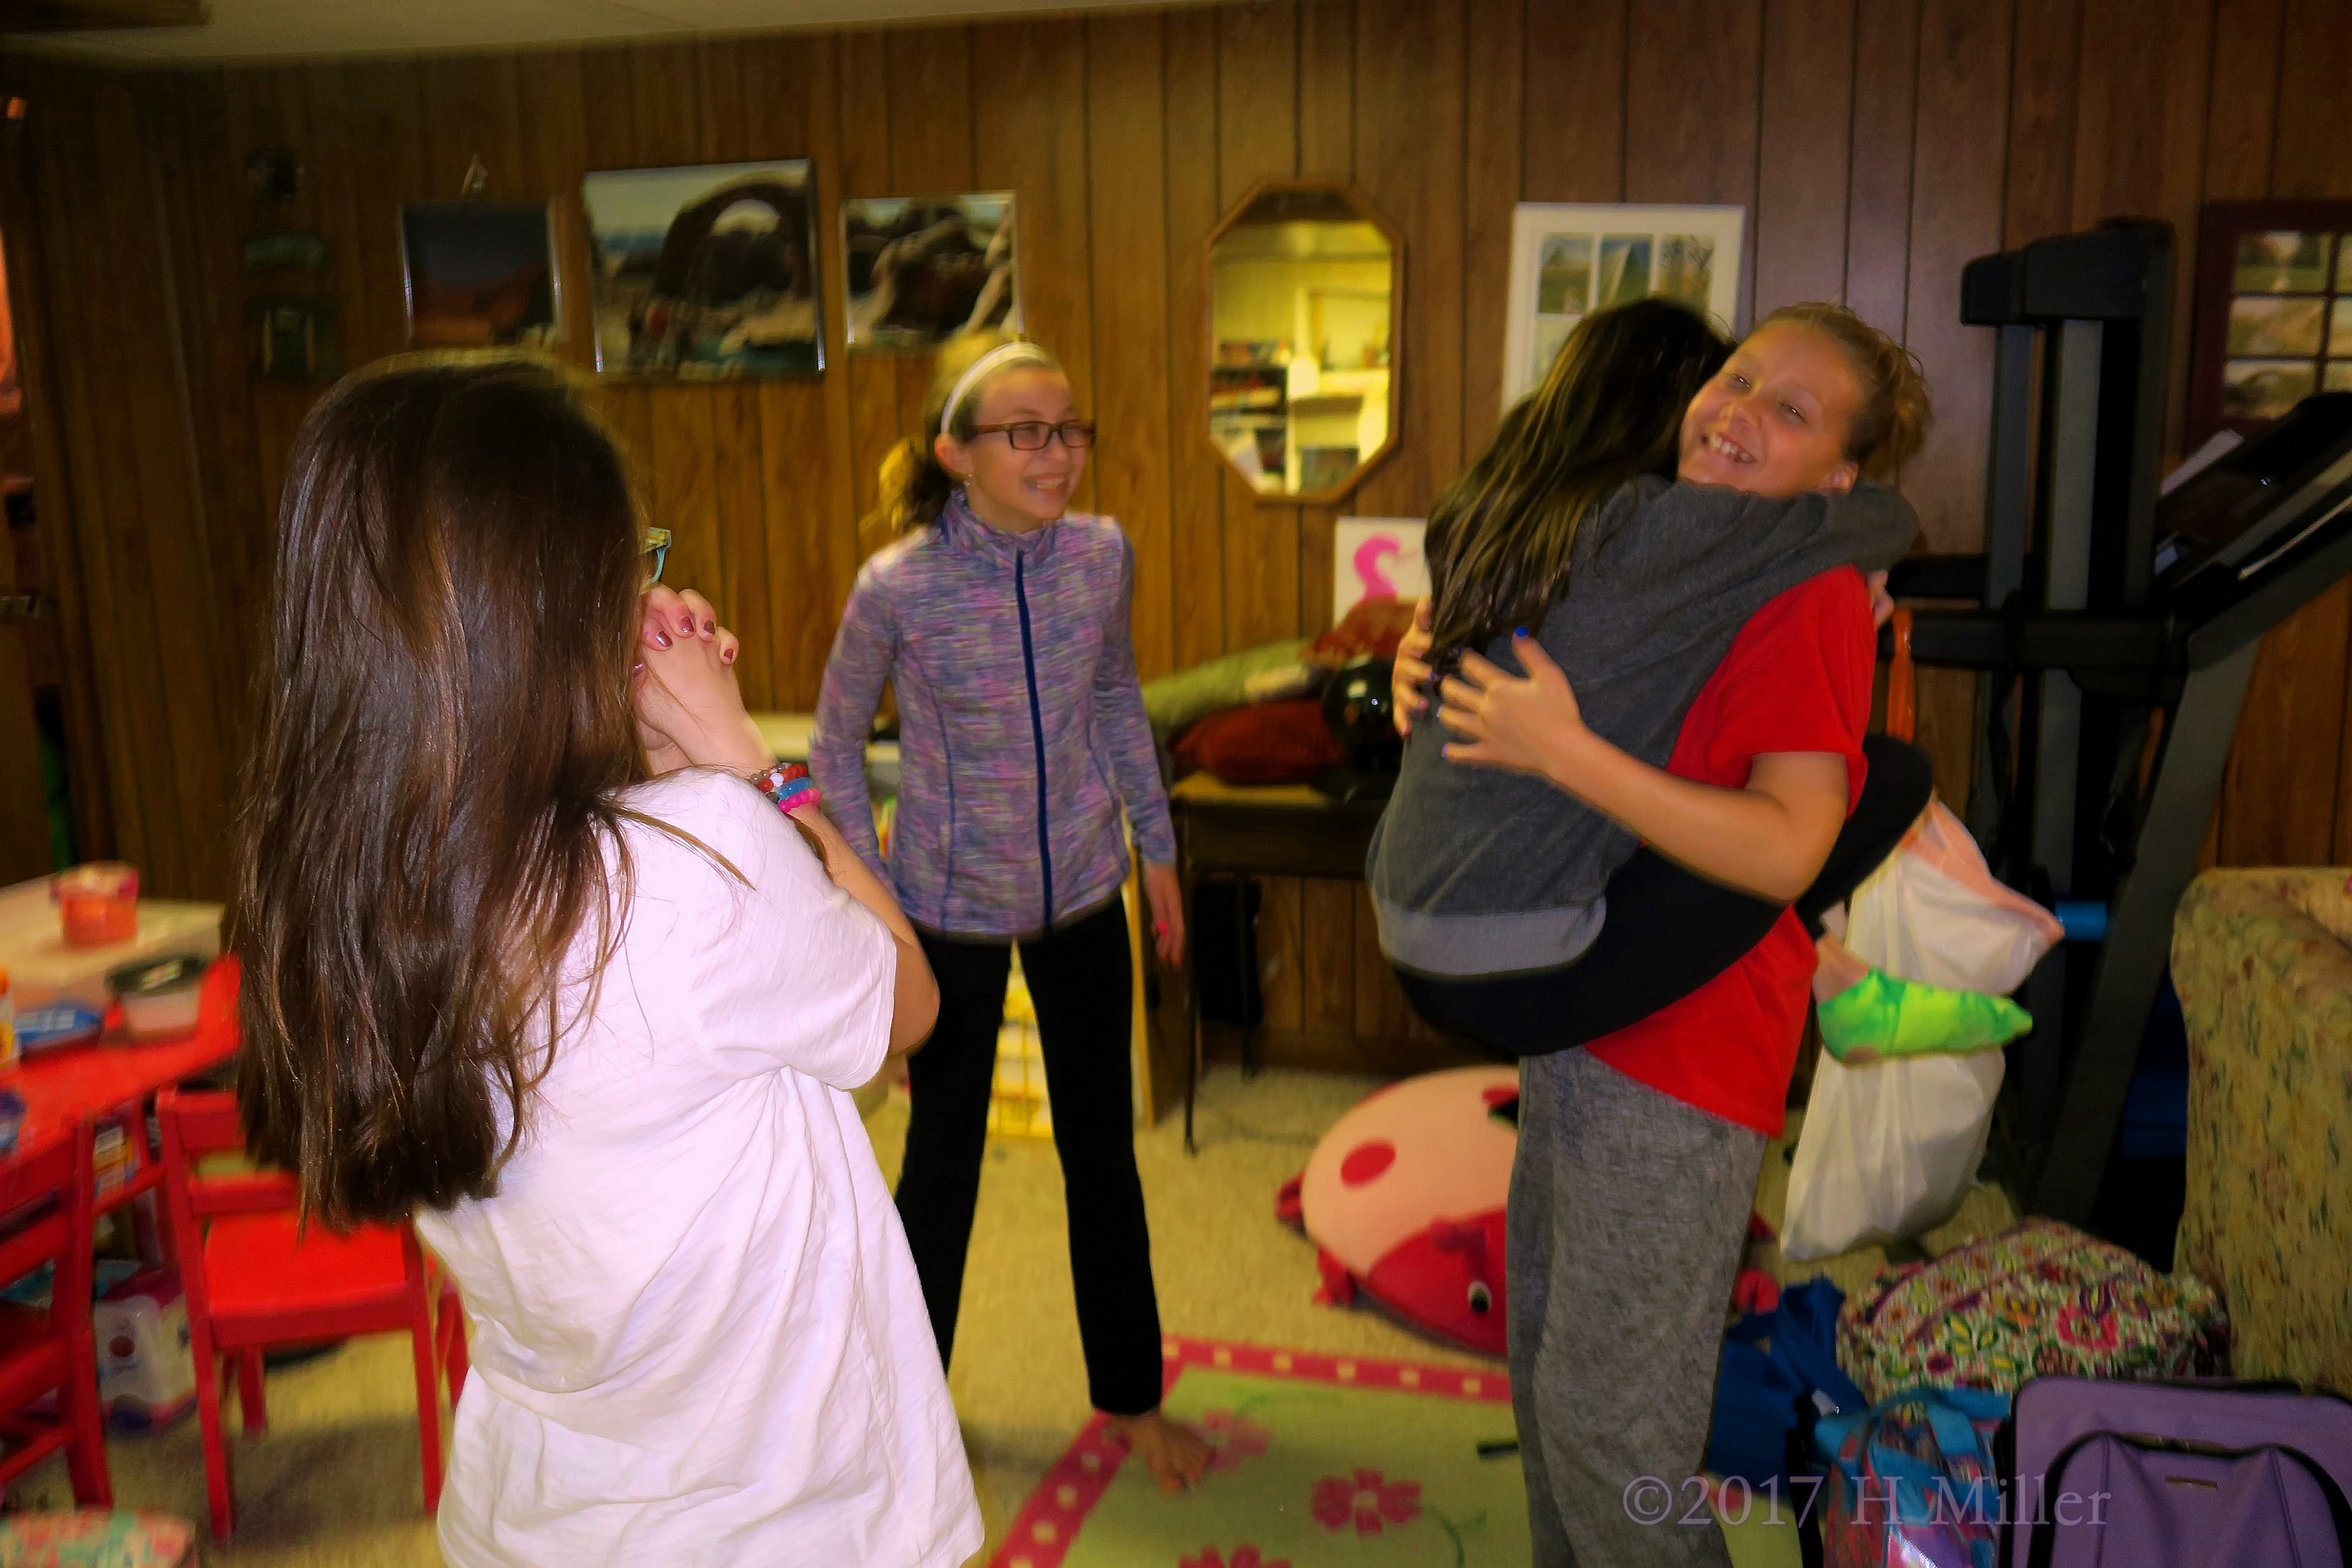 Hugging And Dancing At The Kids Spa. 